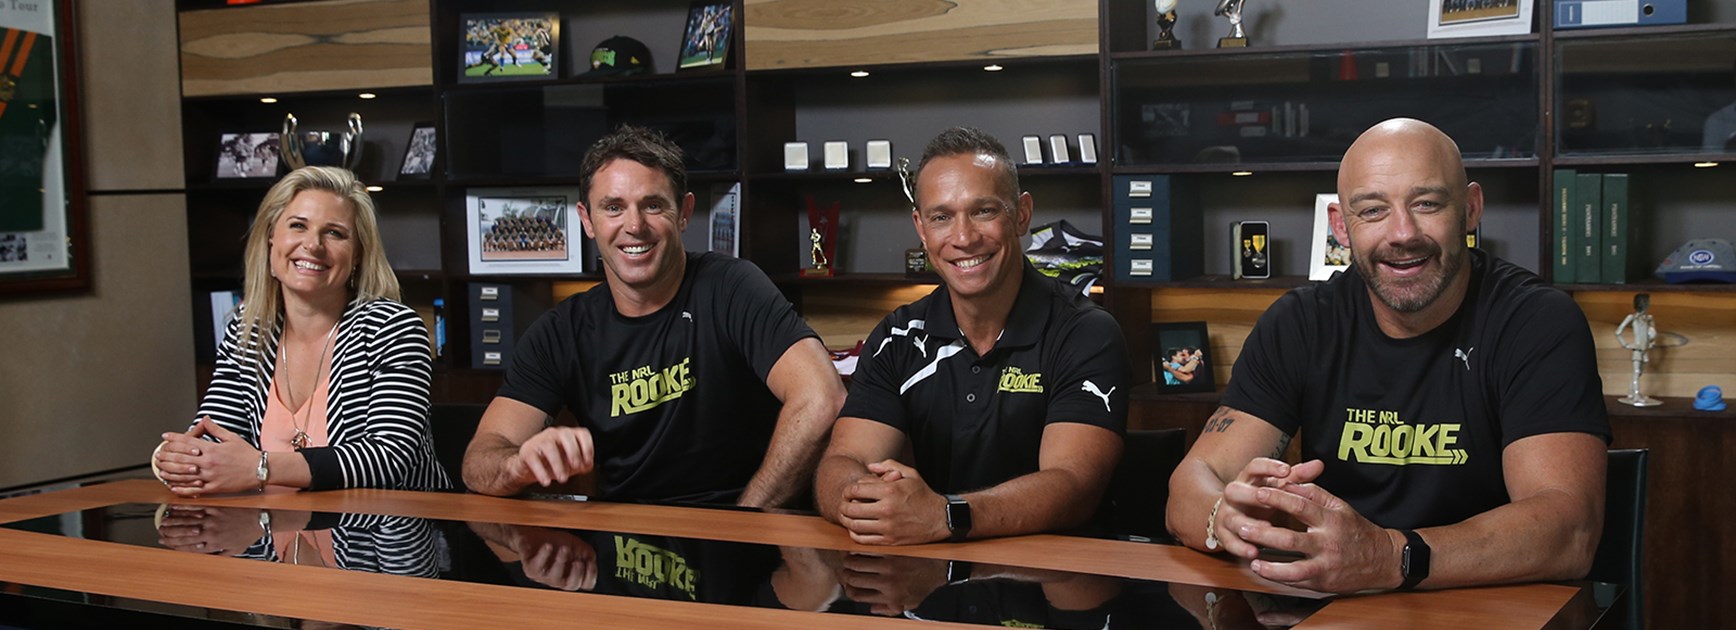 Kate Baecher, Brad Fittler, Adrian Lam and Mark Geyer in 'The War Room' on The NRL Rookie.